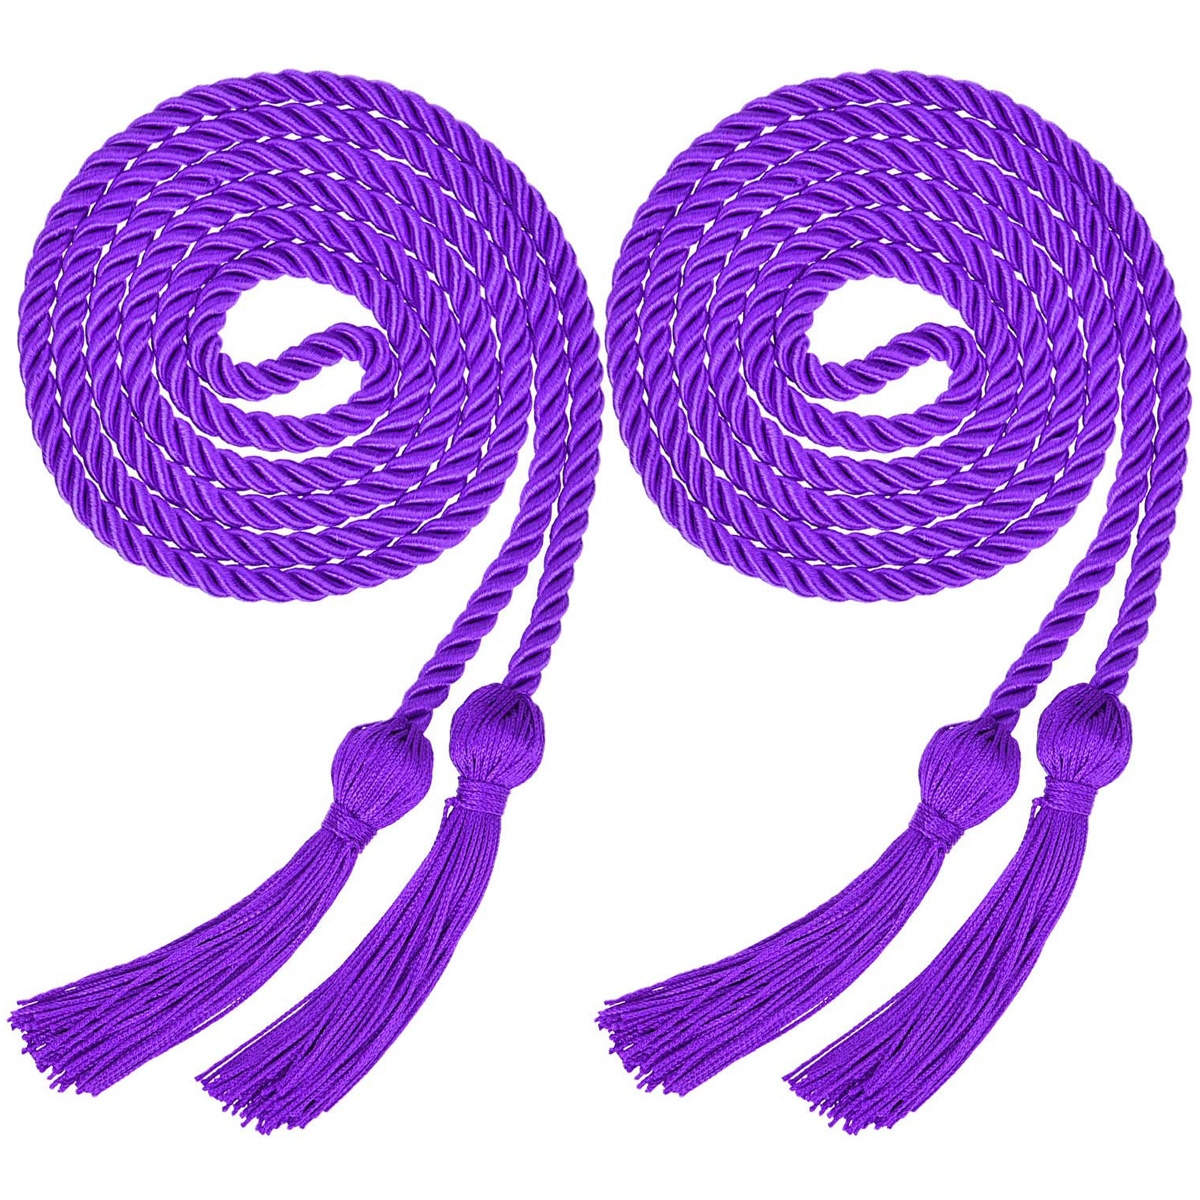 2 Pieces Graduation Cords Polyester Yarn Honor Cord with Tassel for Graduation Students (Purple)